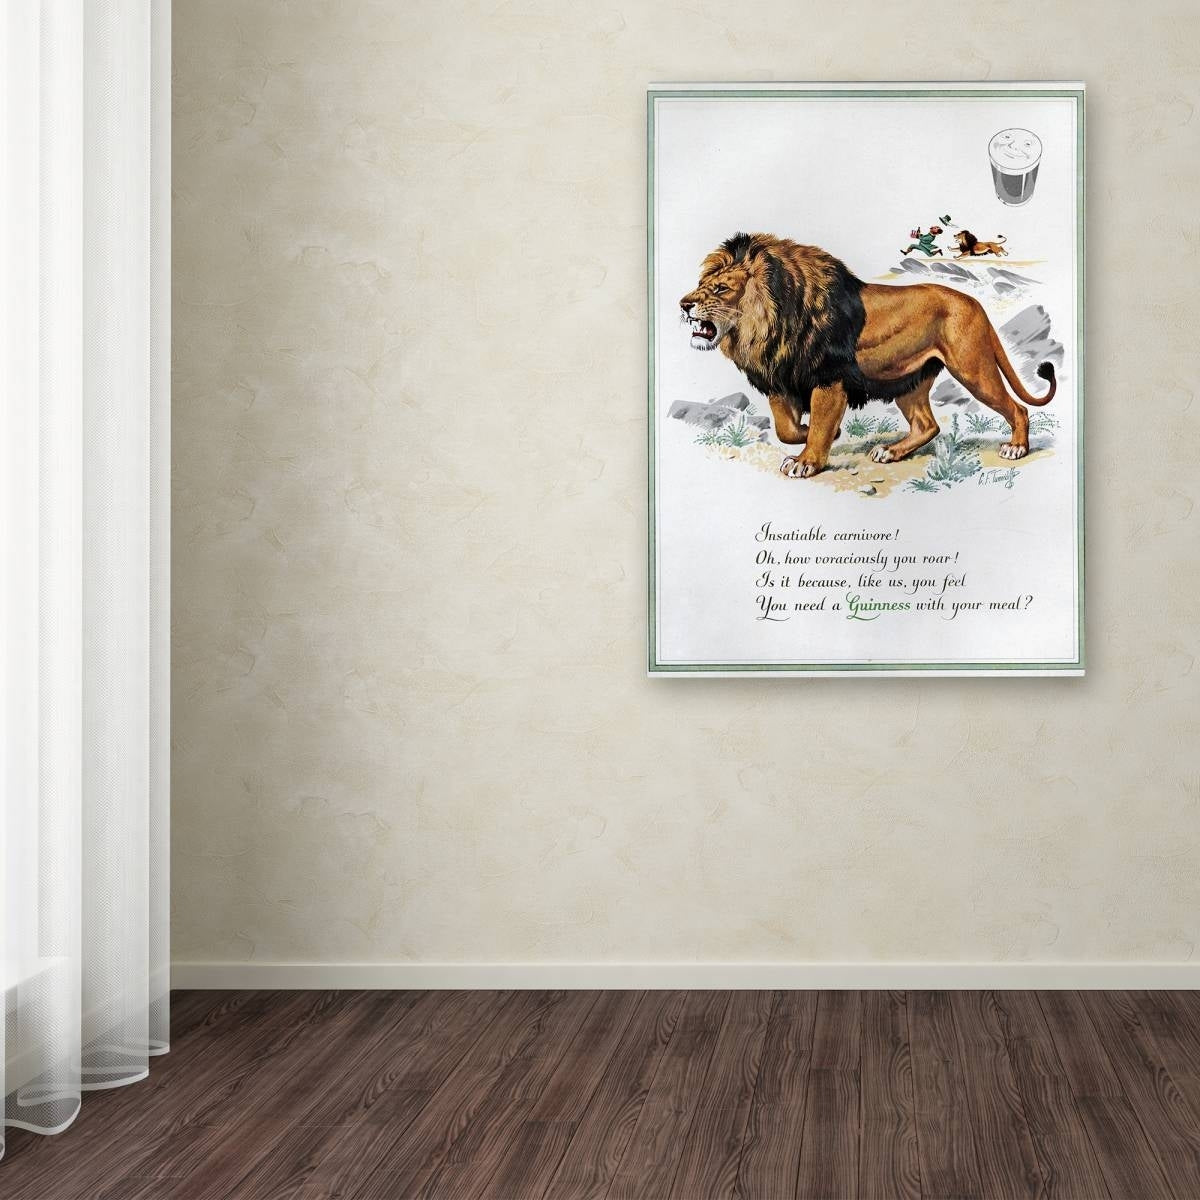 A vintage advertisement of a Guinness lion in a room, perfect for Guinness Brewery 'Guinness Lion' Canvas Art.